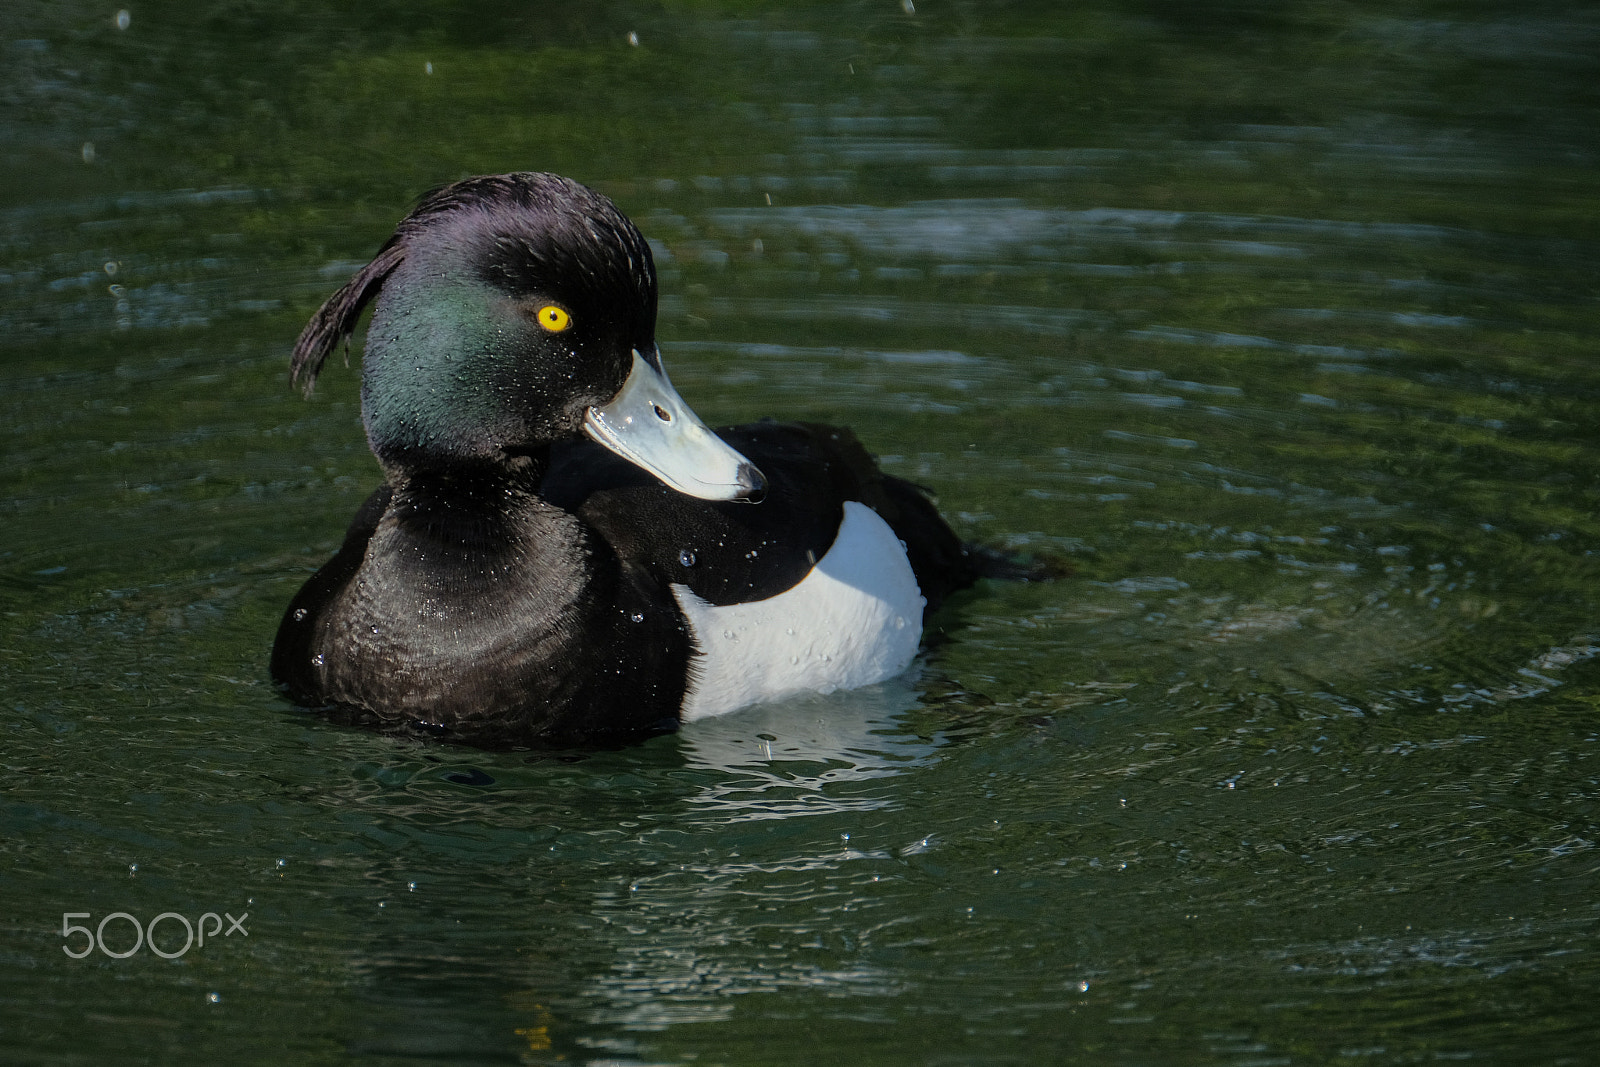 XF100-400mmF4.5-5.6 R LM OIS WR + 1.4x sample photo. Tufted duck photography